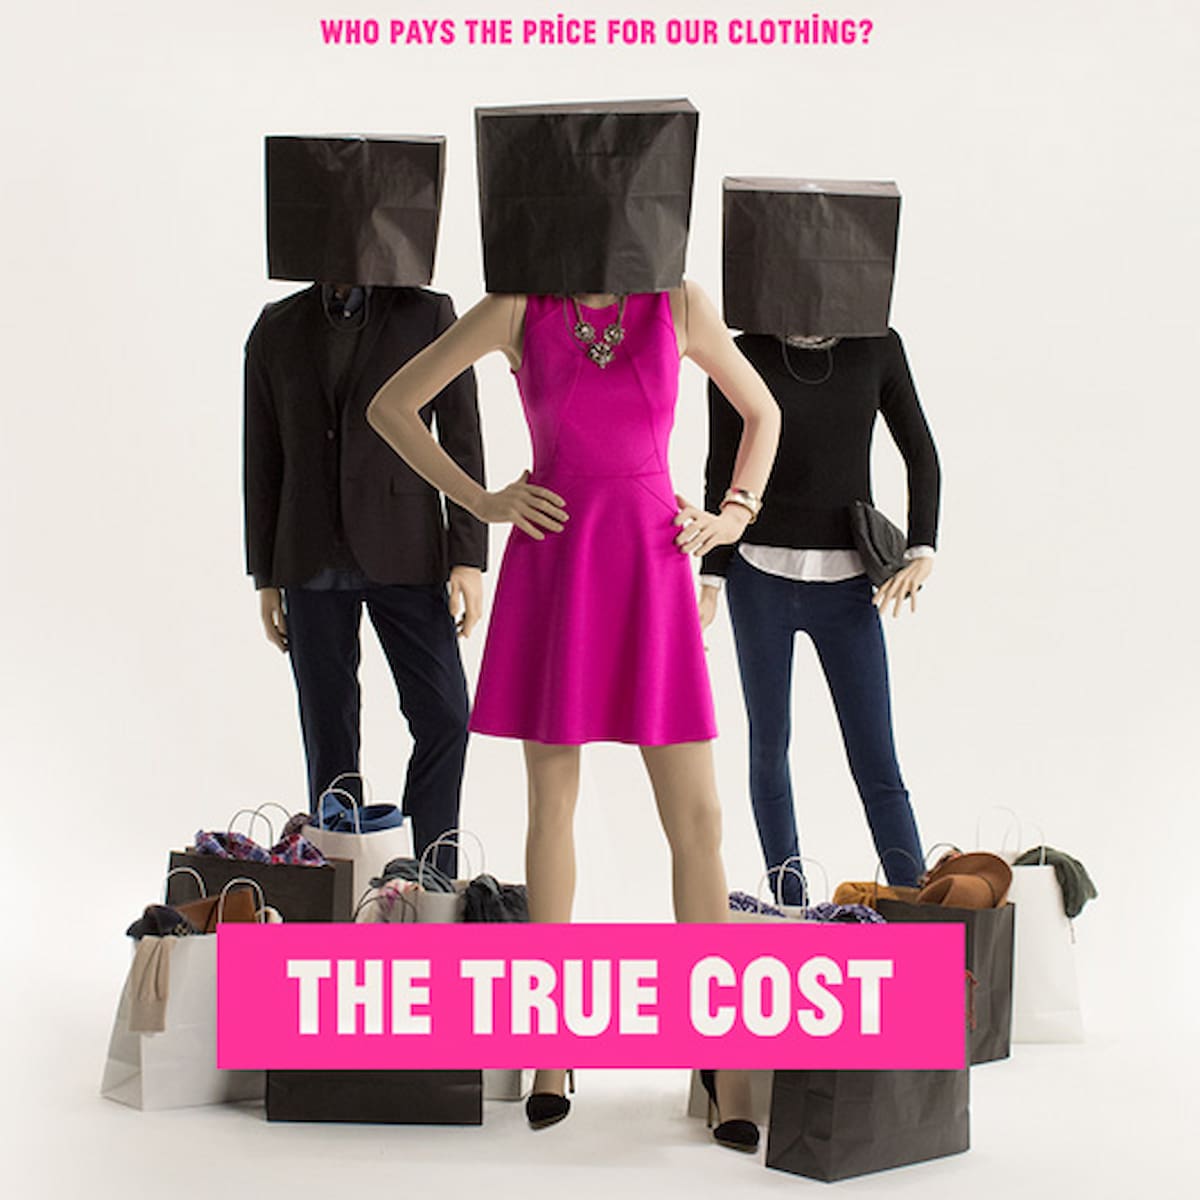 Three people with bags over their heads standing next to full shopping bags and text overlay "The True Cost."